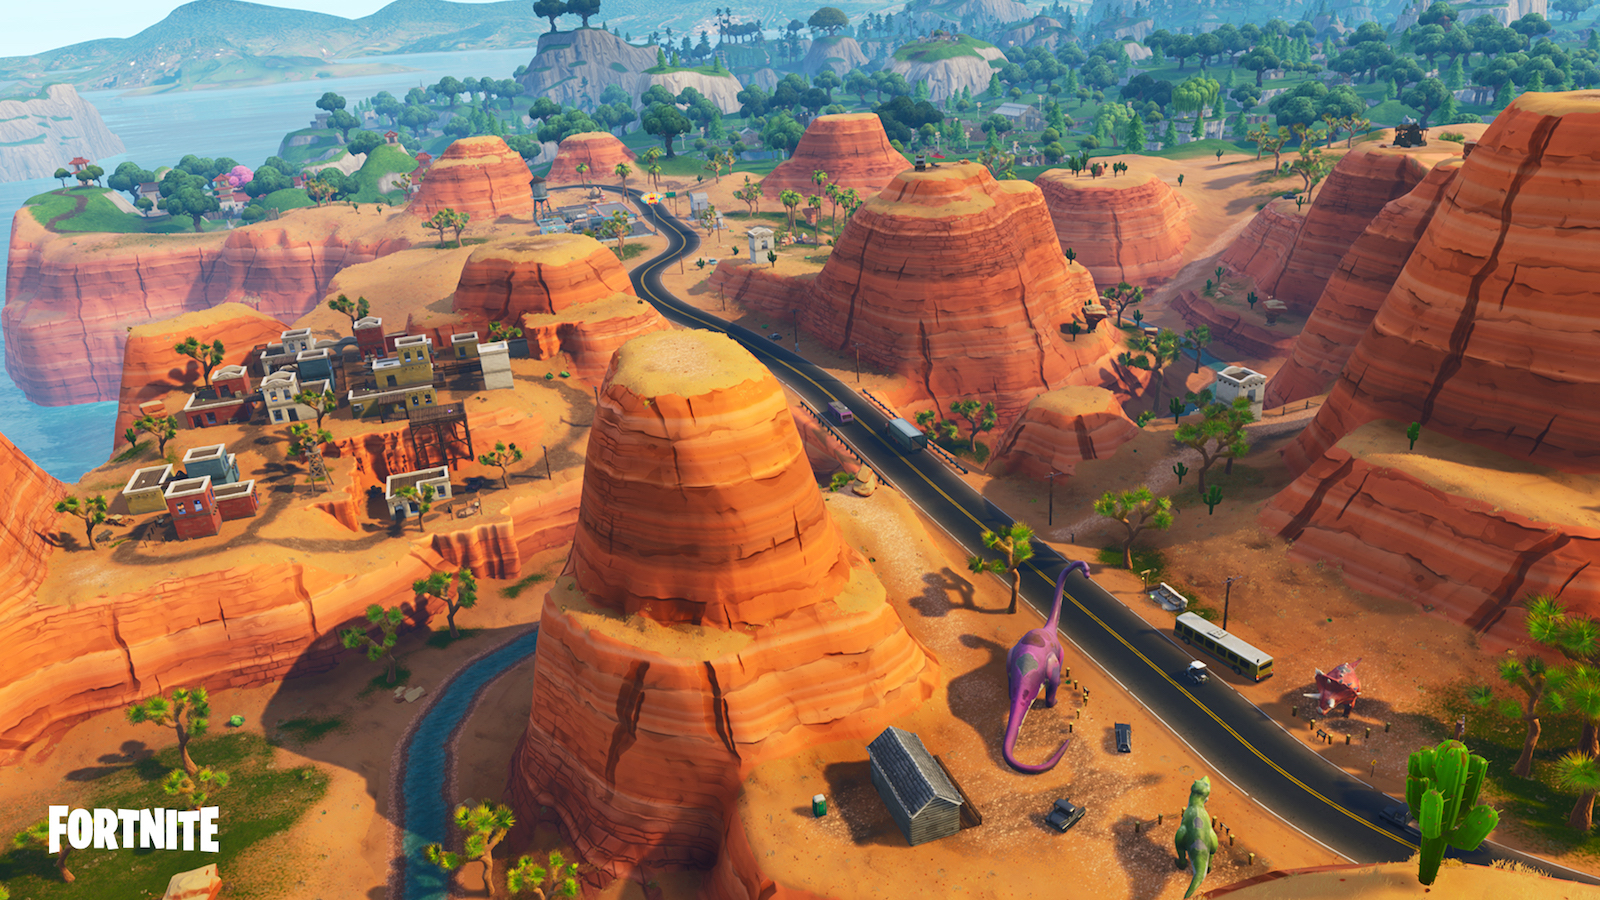 Fortnite Season Five Adds A Desert Locale Golf Carts And Rifts - fortnite while the new locations and features will capture your attention epic has made a number of important tweaks to the in game mechanics